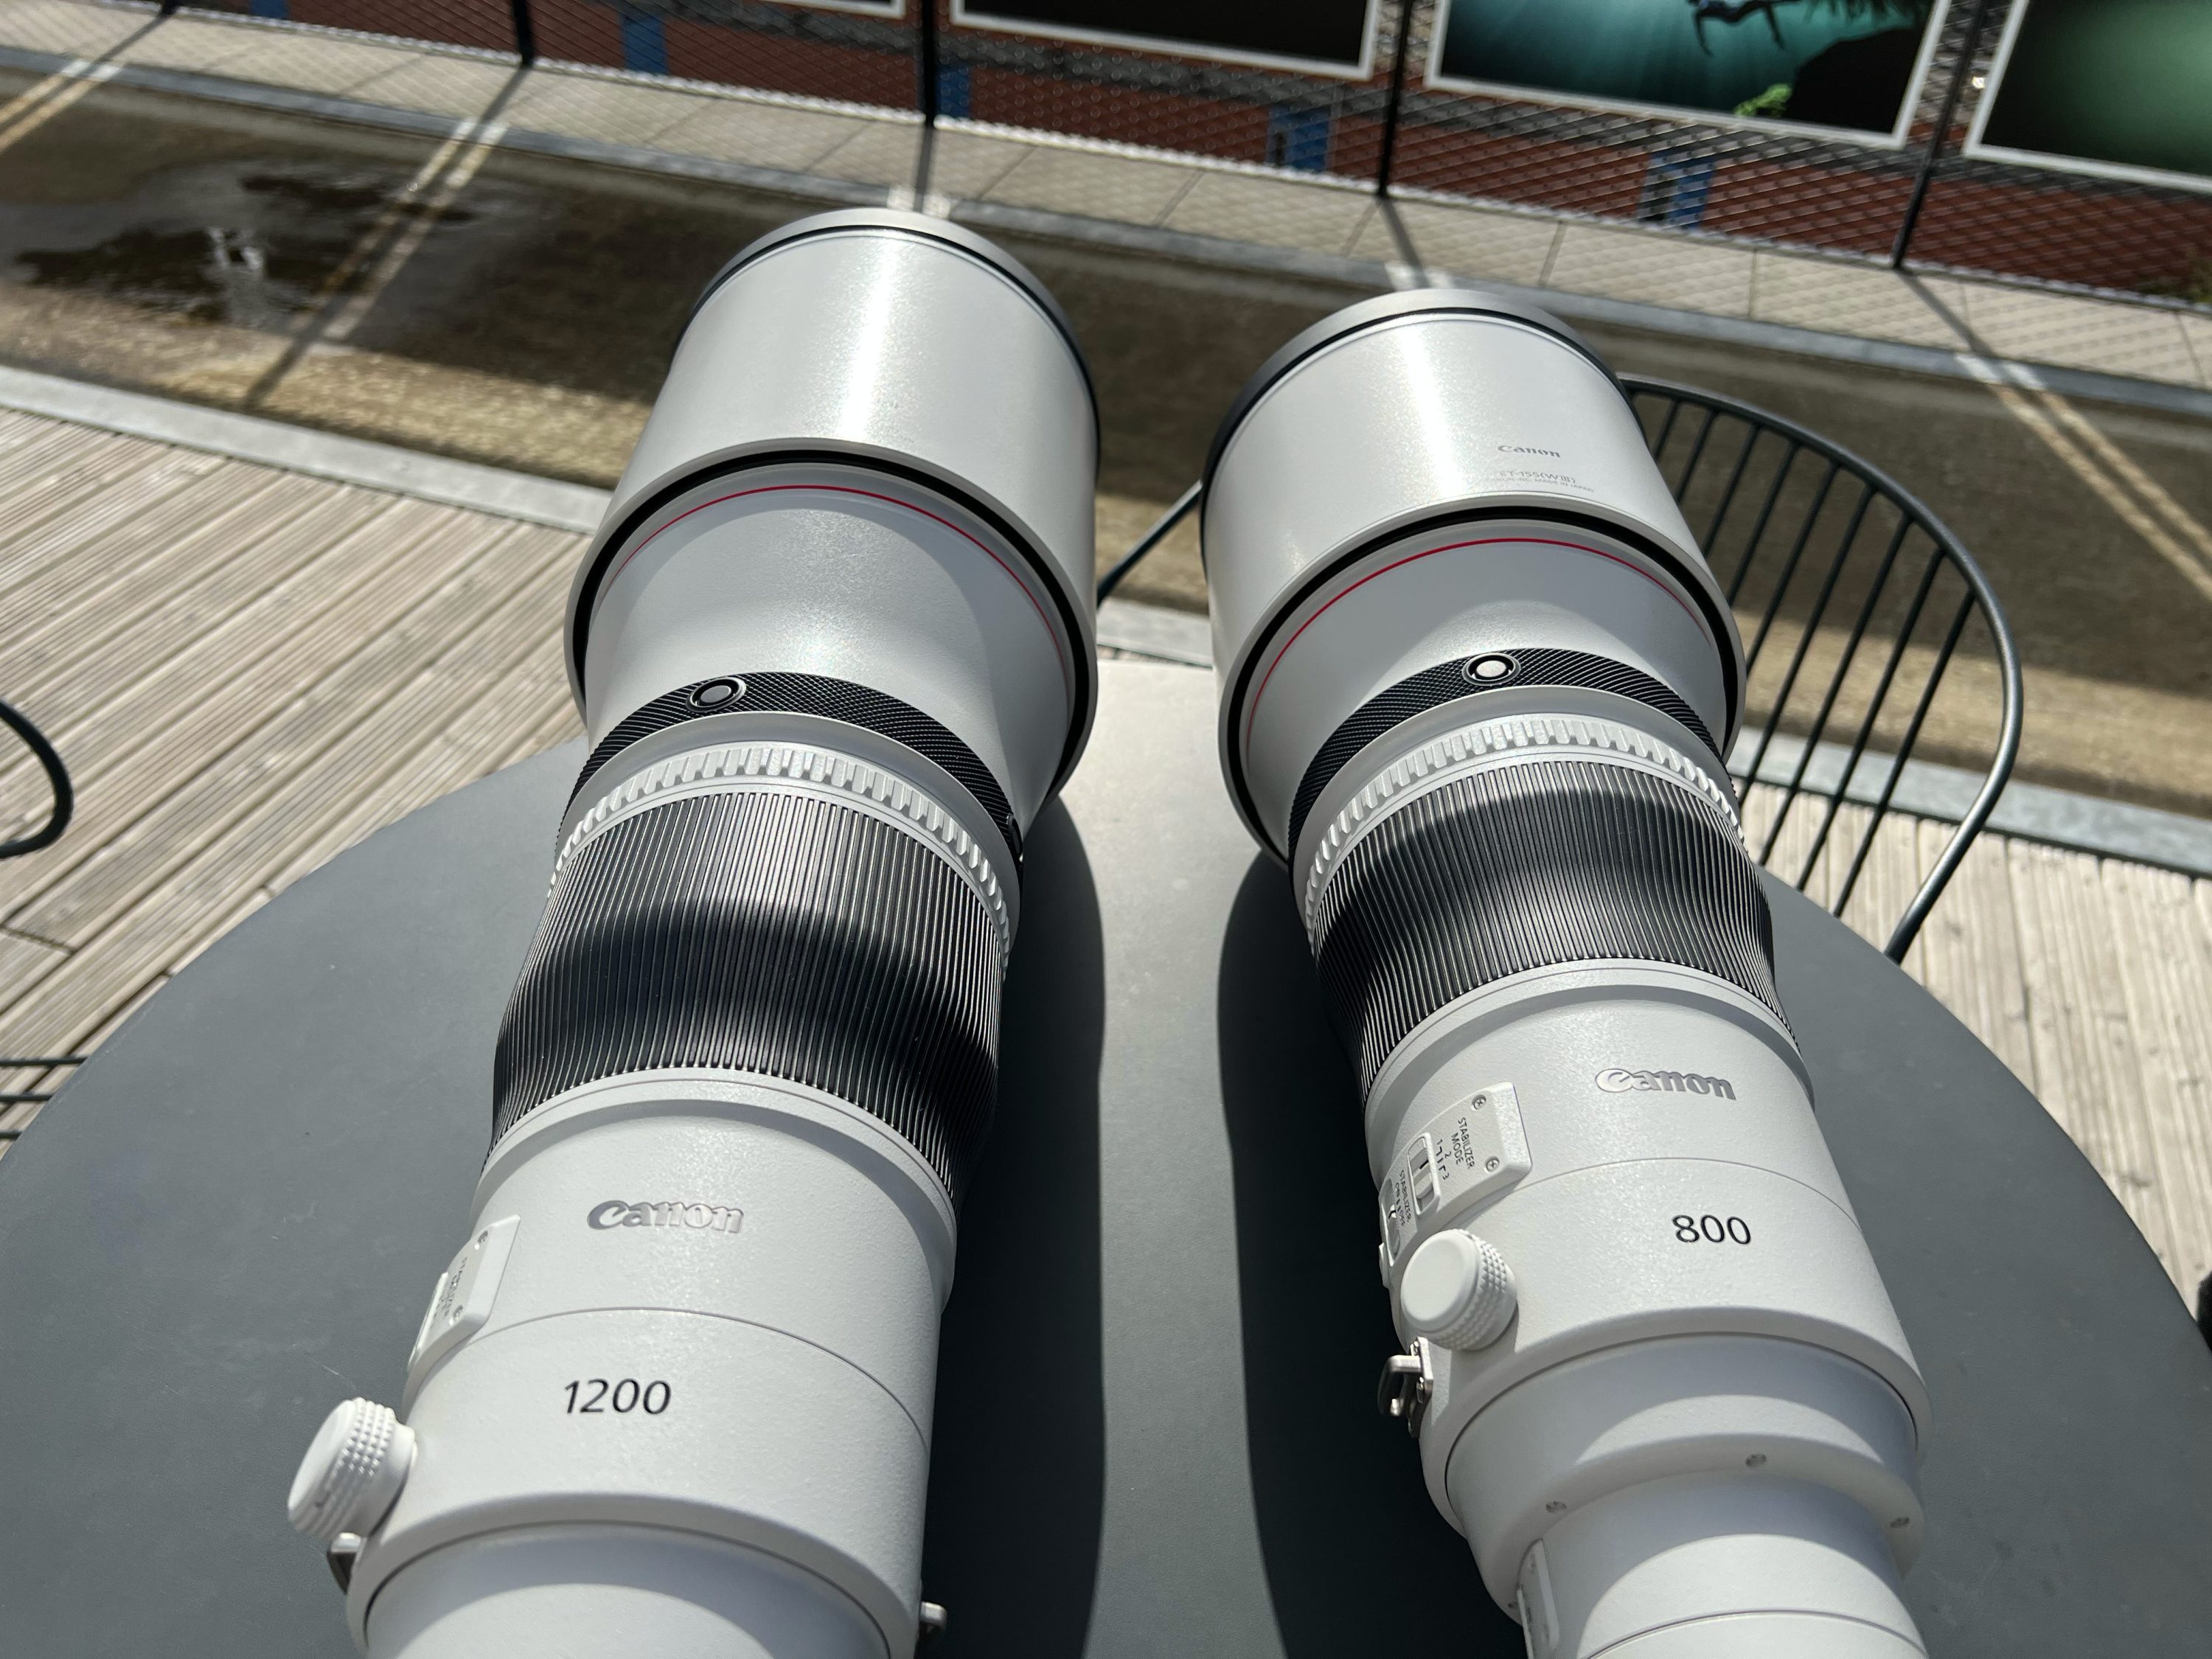 Canon-rf-800-1200-mm-05-bis